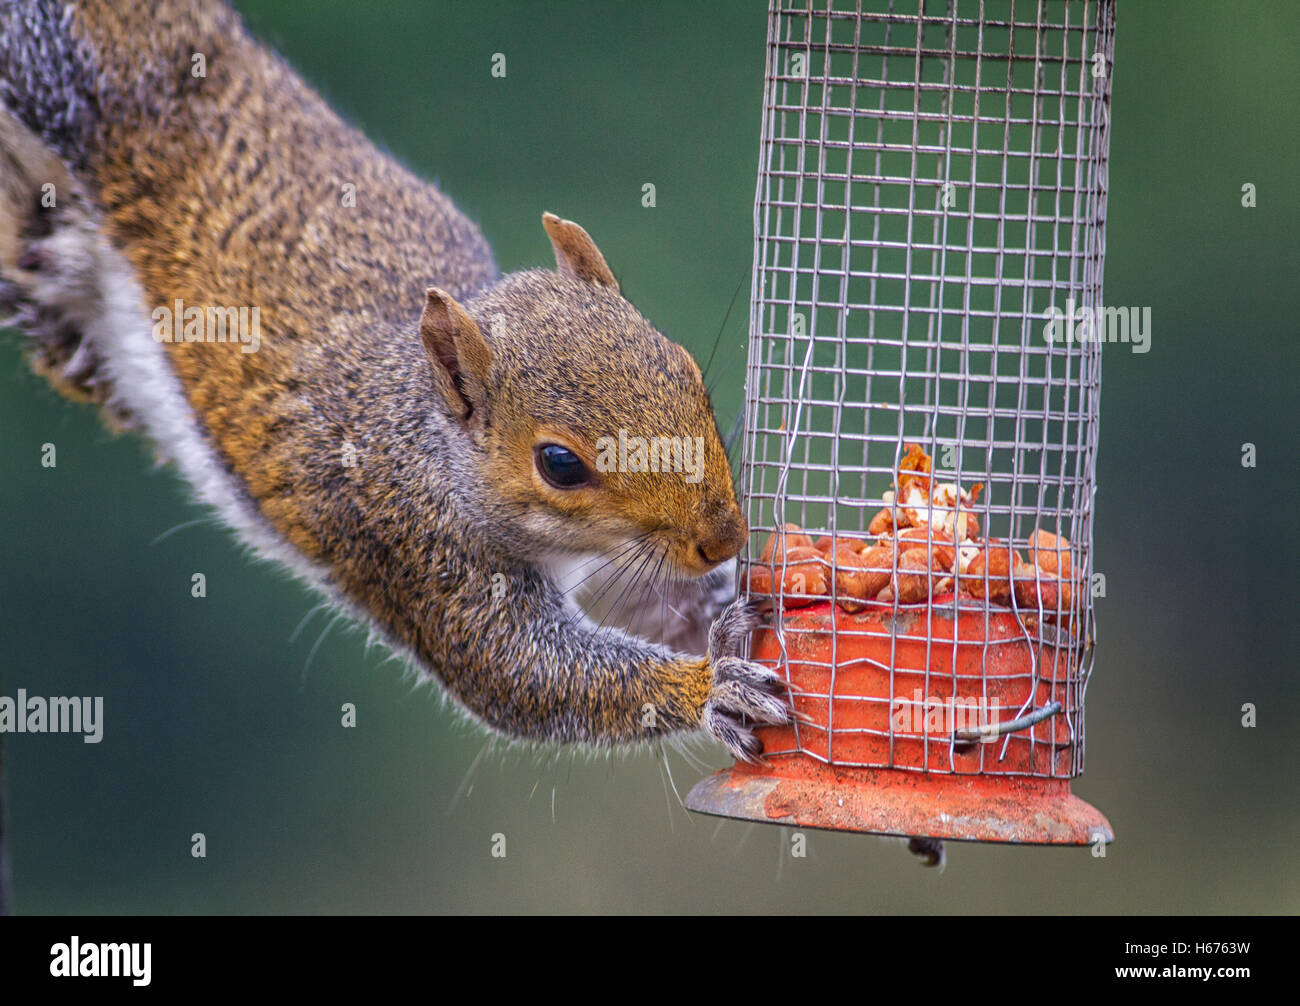 Naughty grey squirrel stealing peanuts from the bird feeder Stock Photo